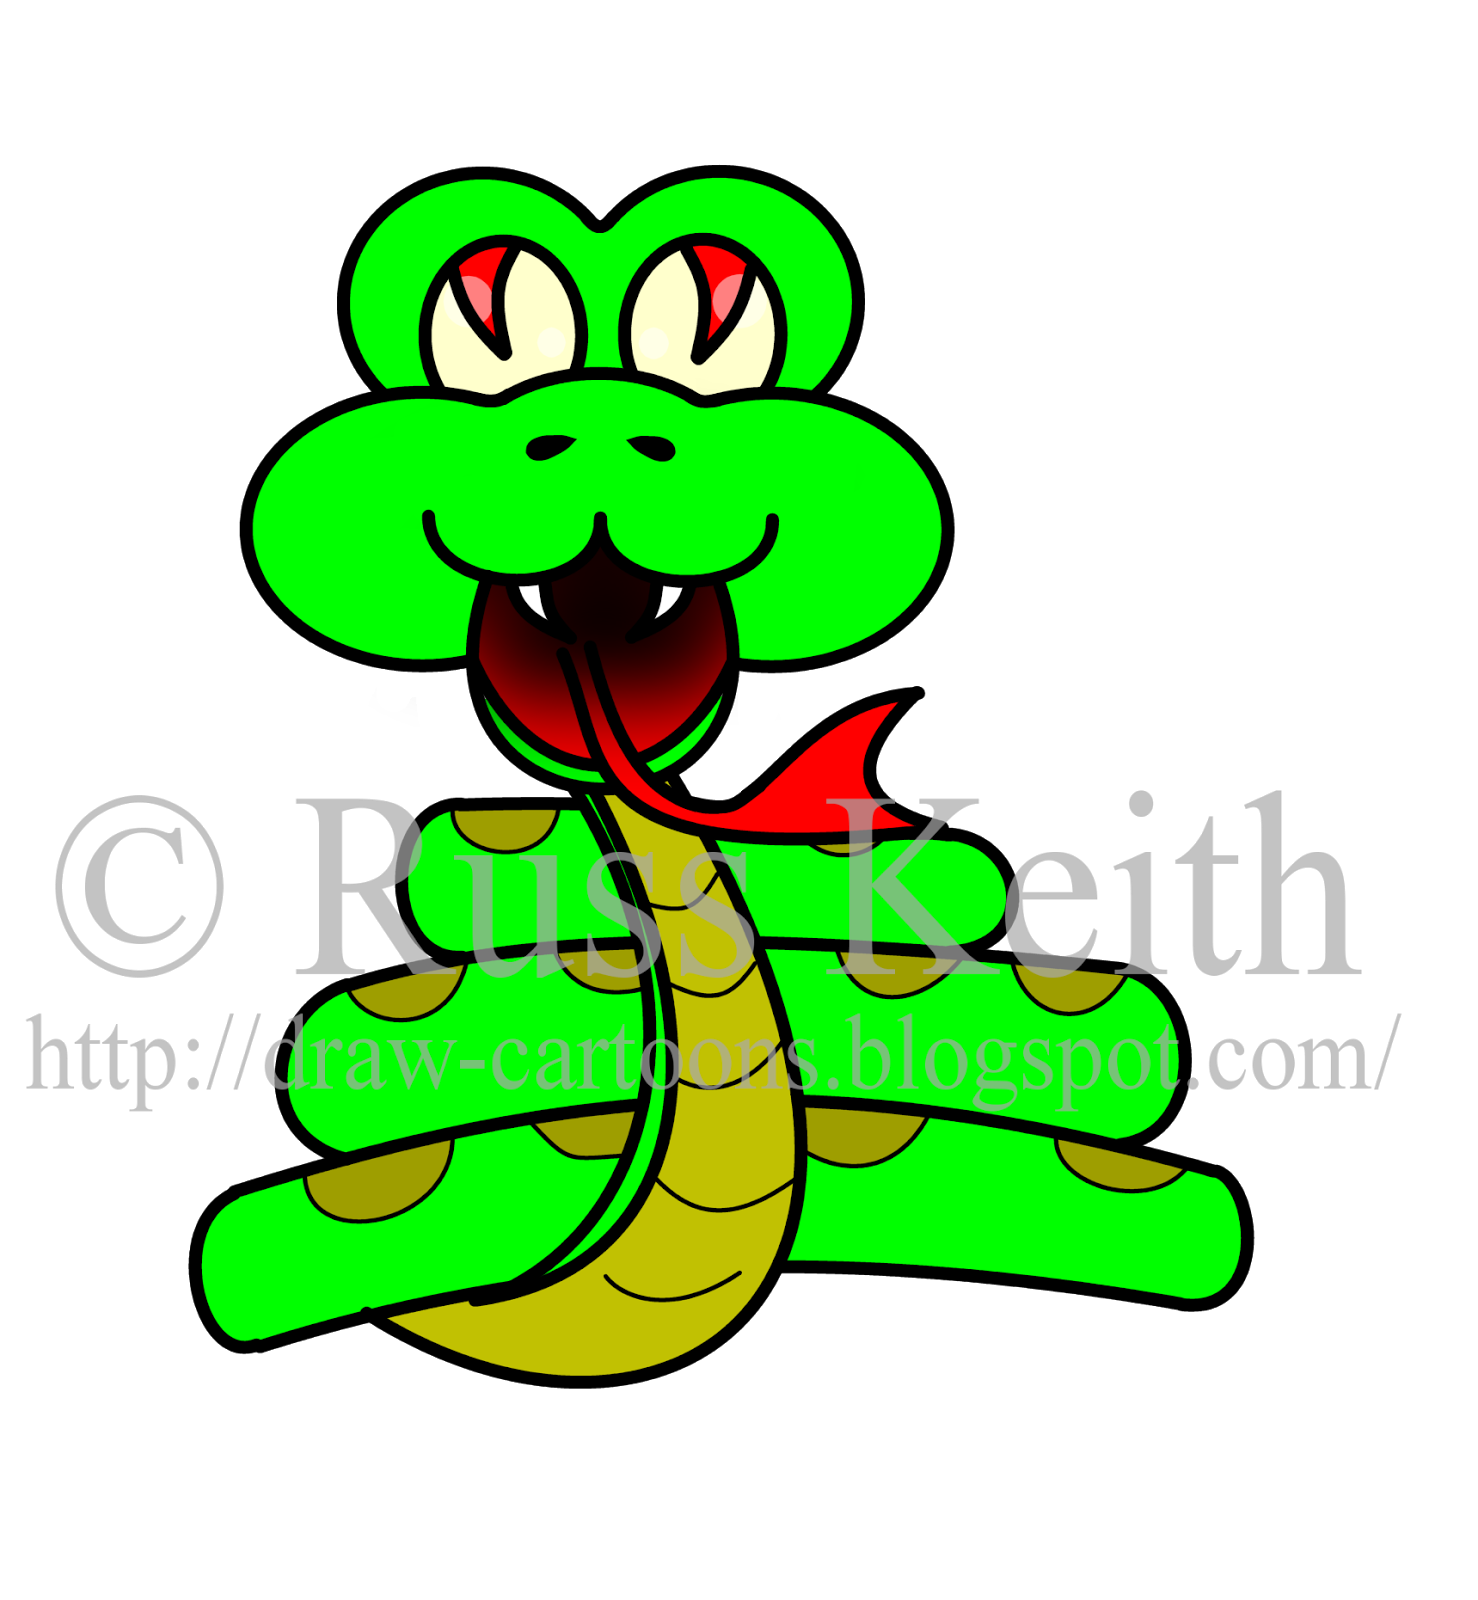 clipart snake tail